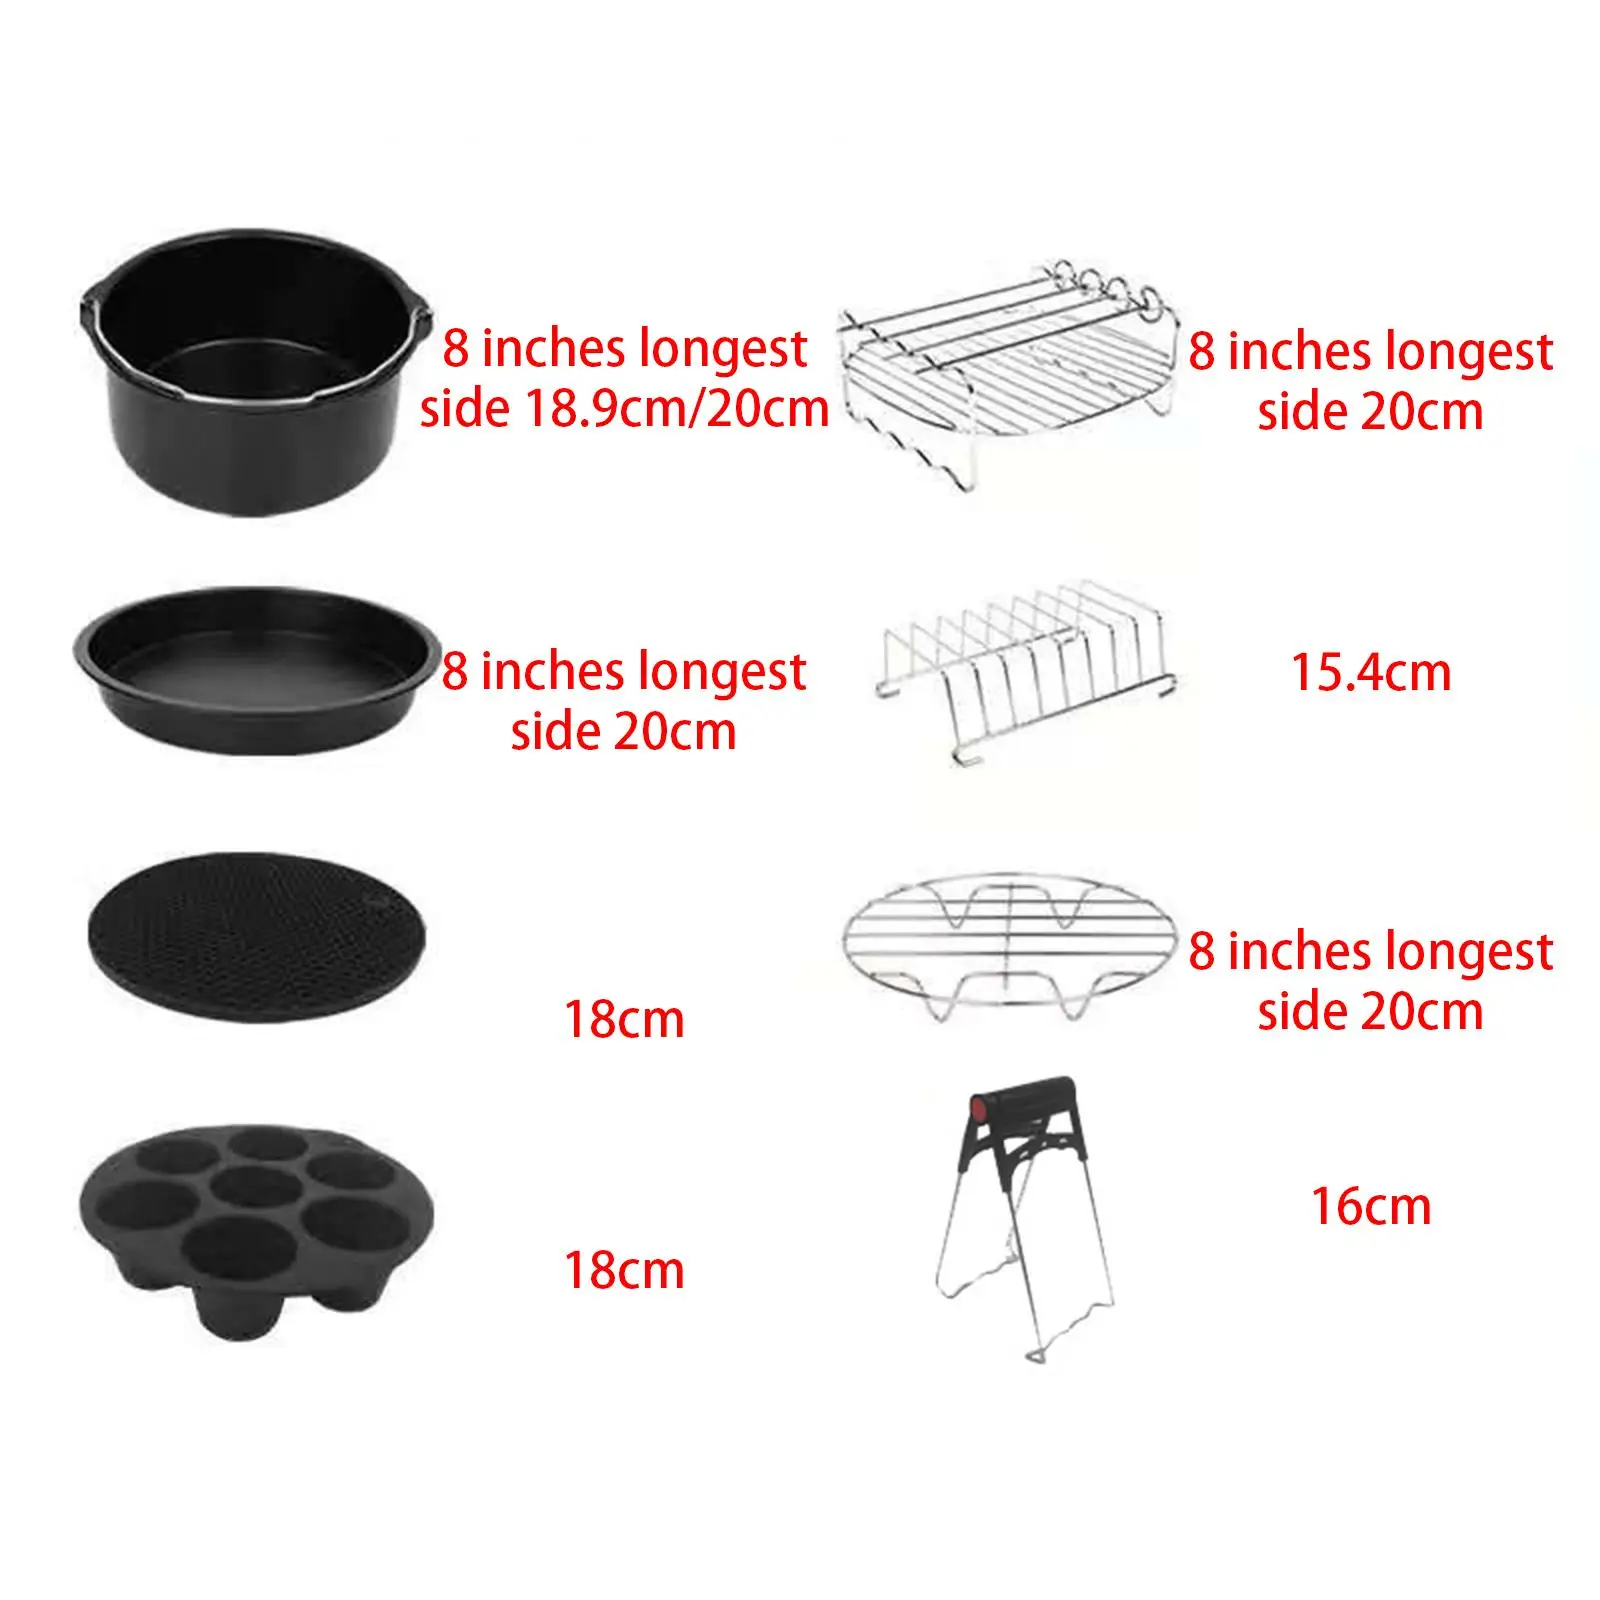 12Pcs Deep Fryer Accessories Pizza Pan Toast Rack Cake Cup Silicone Brush